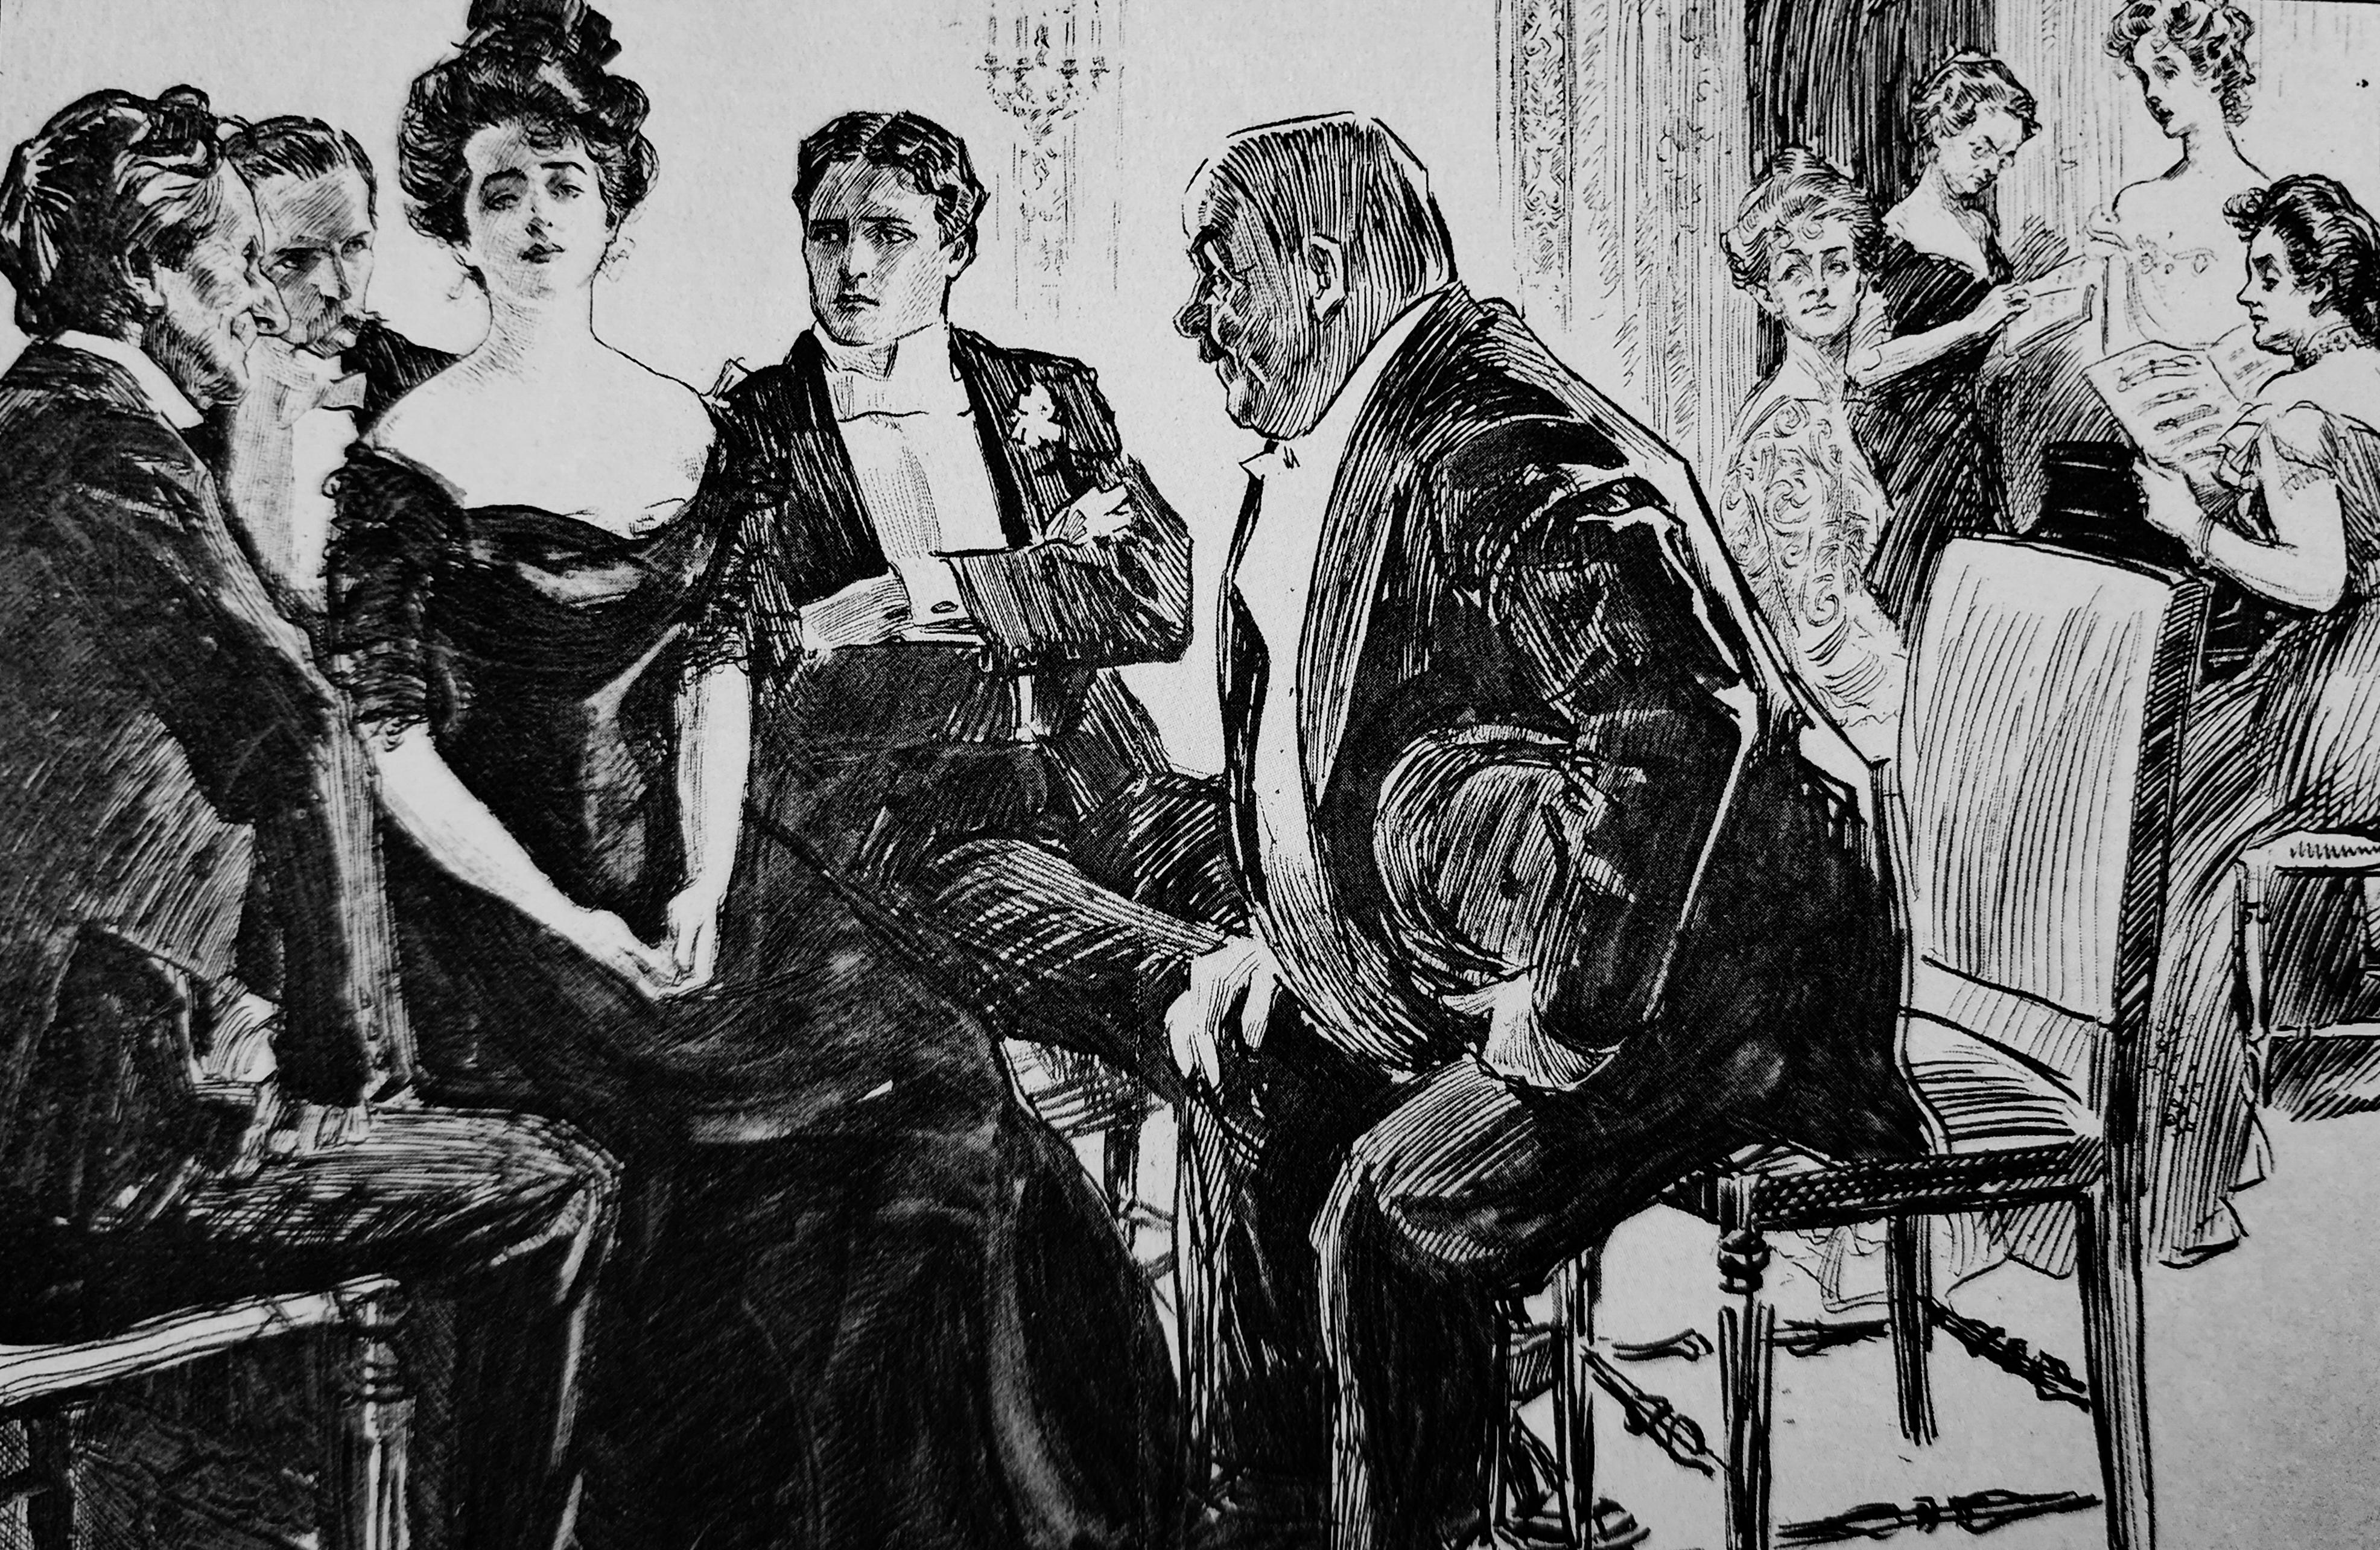 She Is The Subject Of Some Hostile Criticism - By Charles Dana Gibson - Circa 1900.jpg